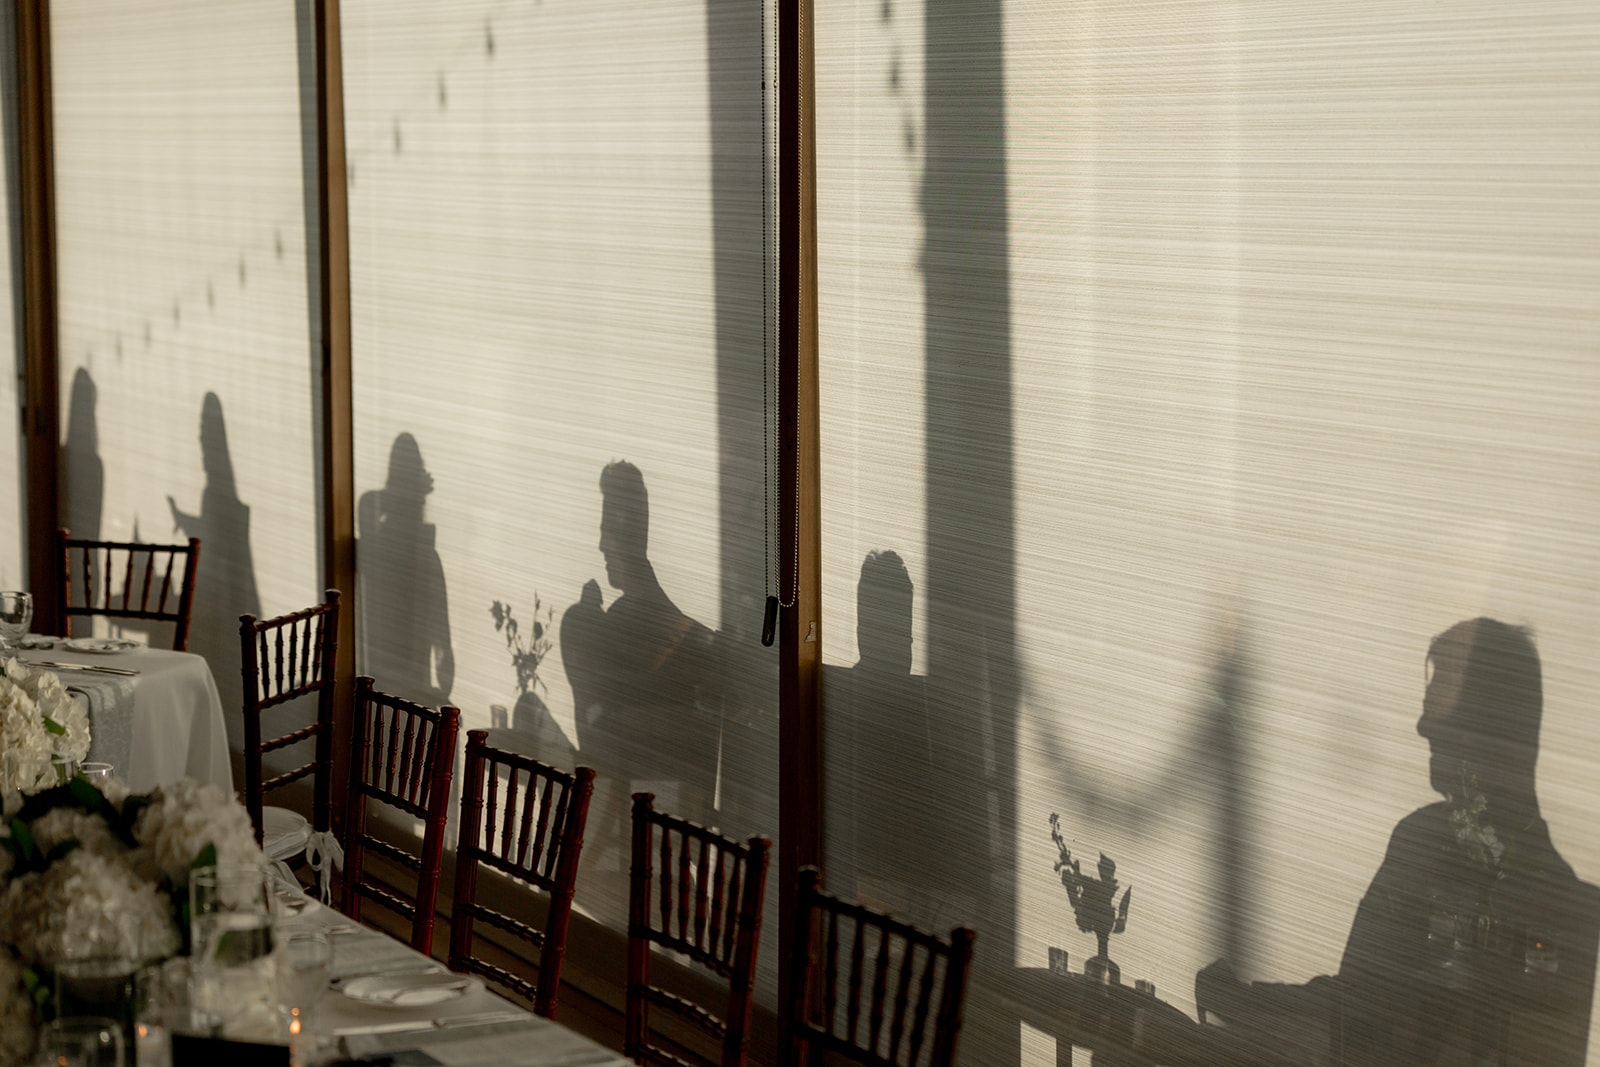 Shadows of wedding guest on blinds photographed from inside during cocktal hour.